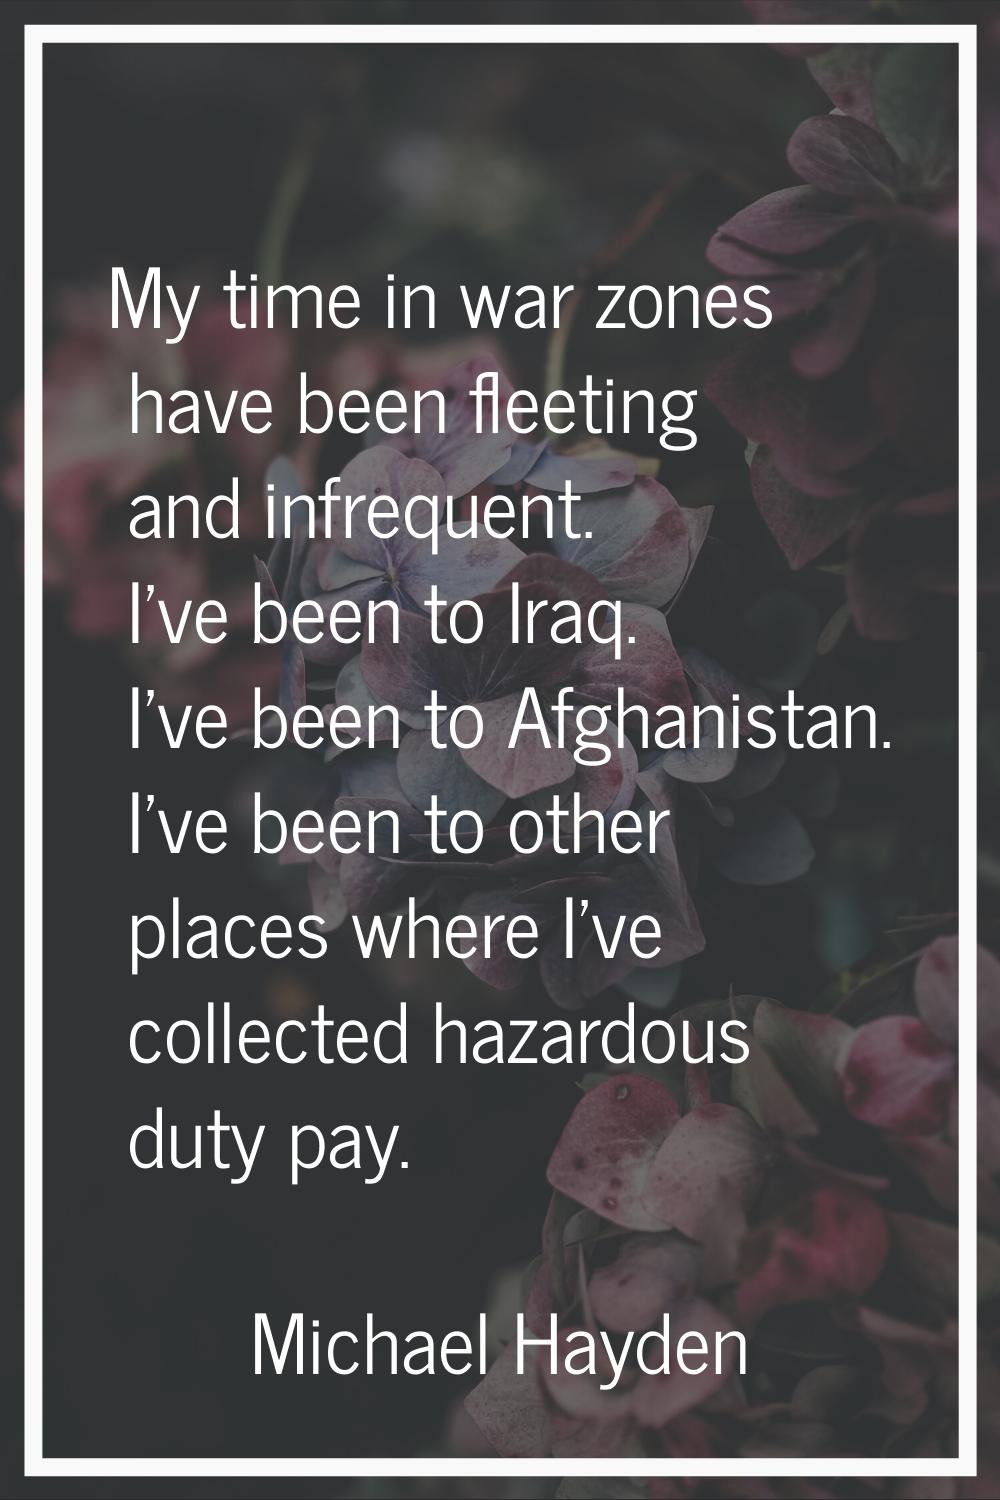 My time in war zones have been fleeting and infrequent. I've been to Iraq. I've been to Afghanistan